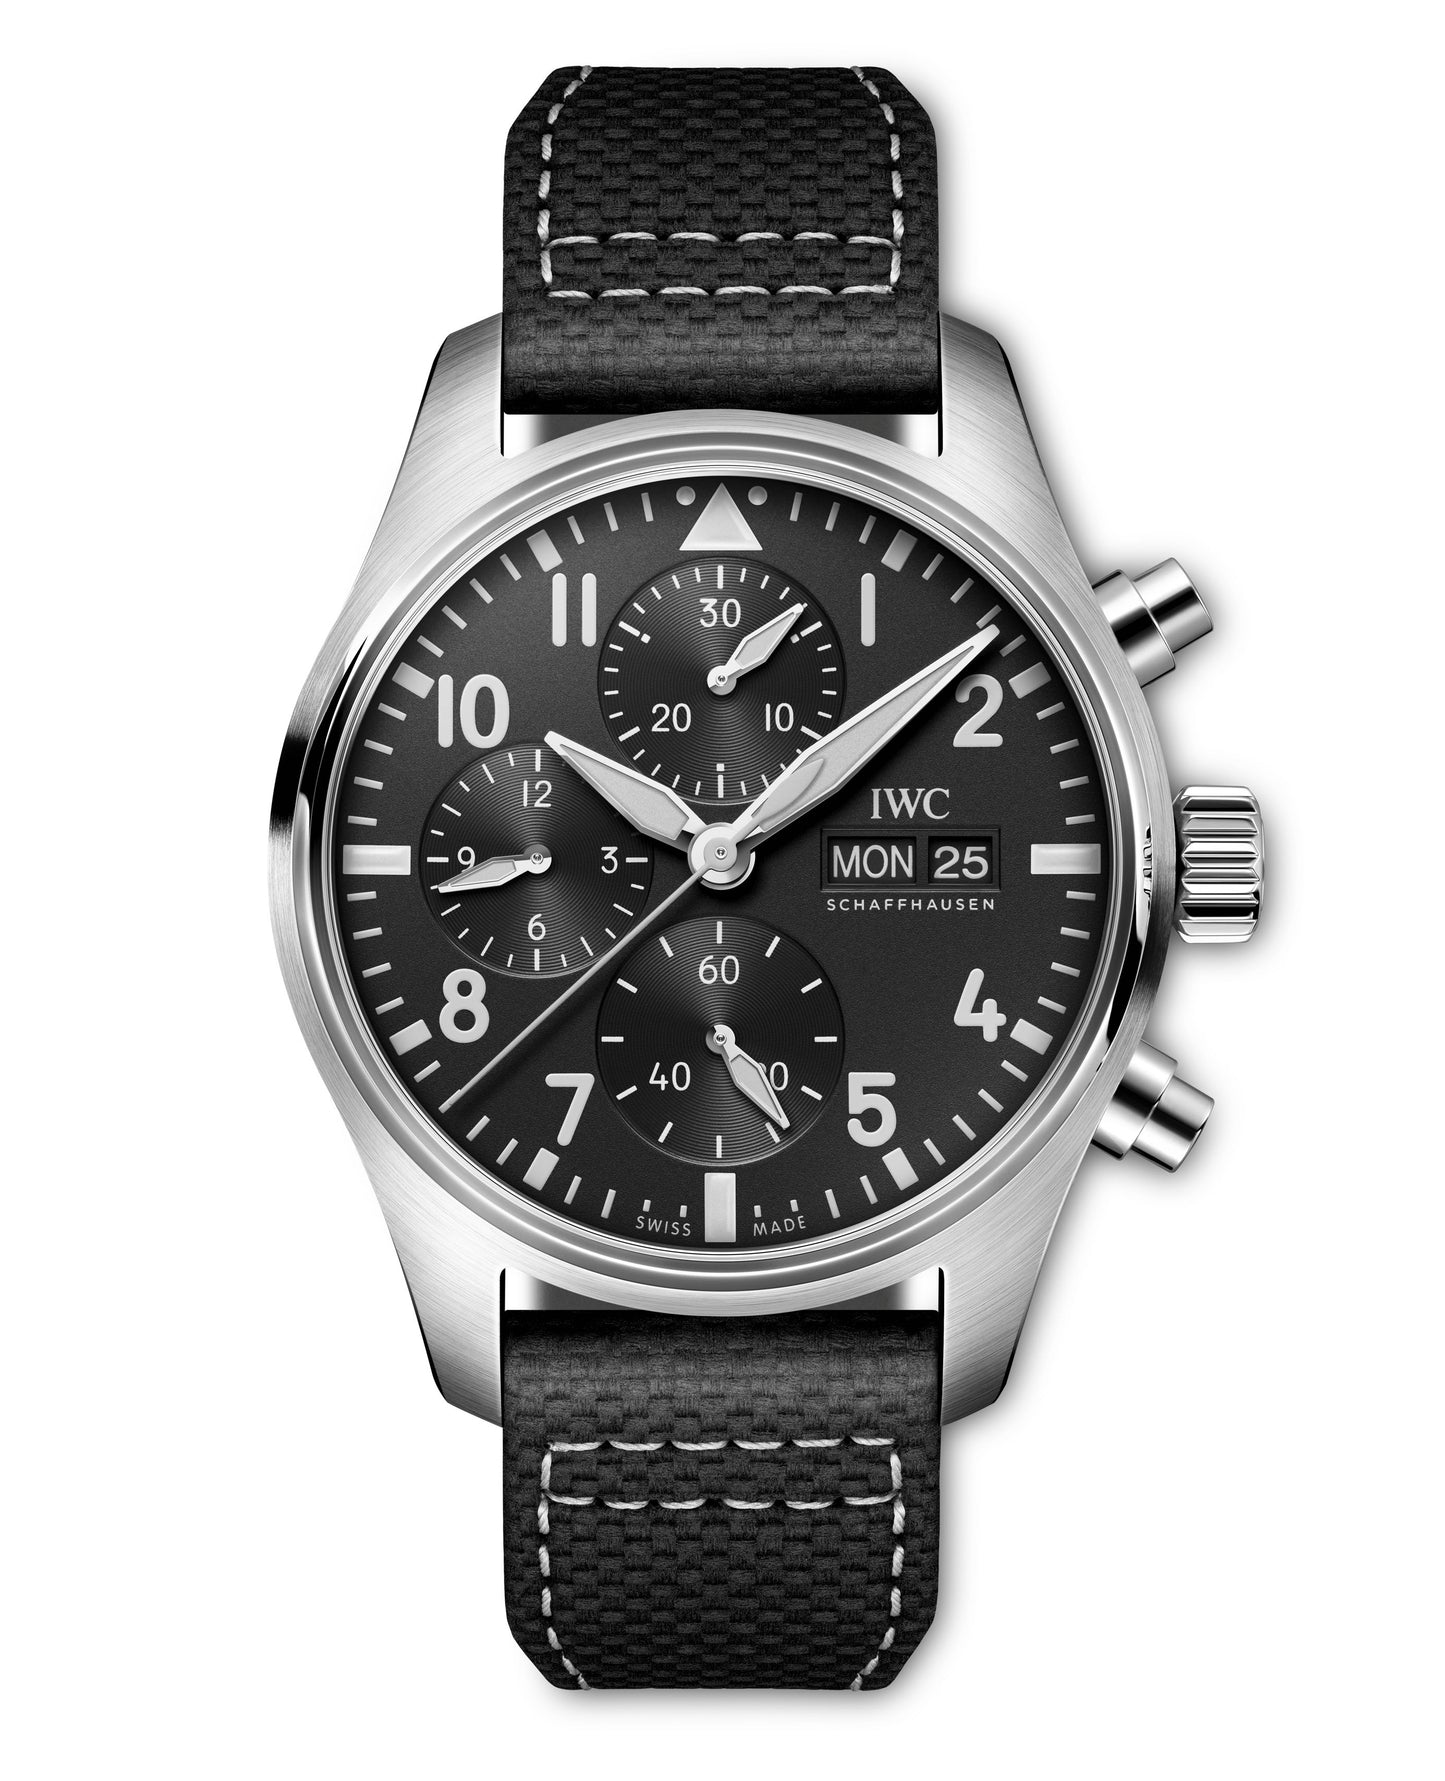 IWC Pilot’s Chronograph C.03 for Collective (Sold Out)